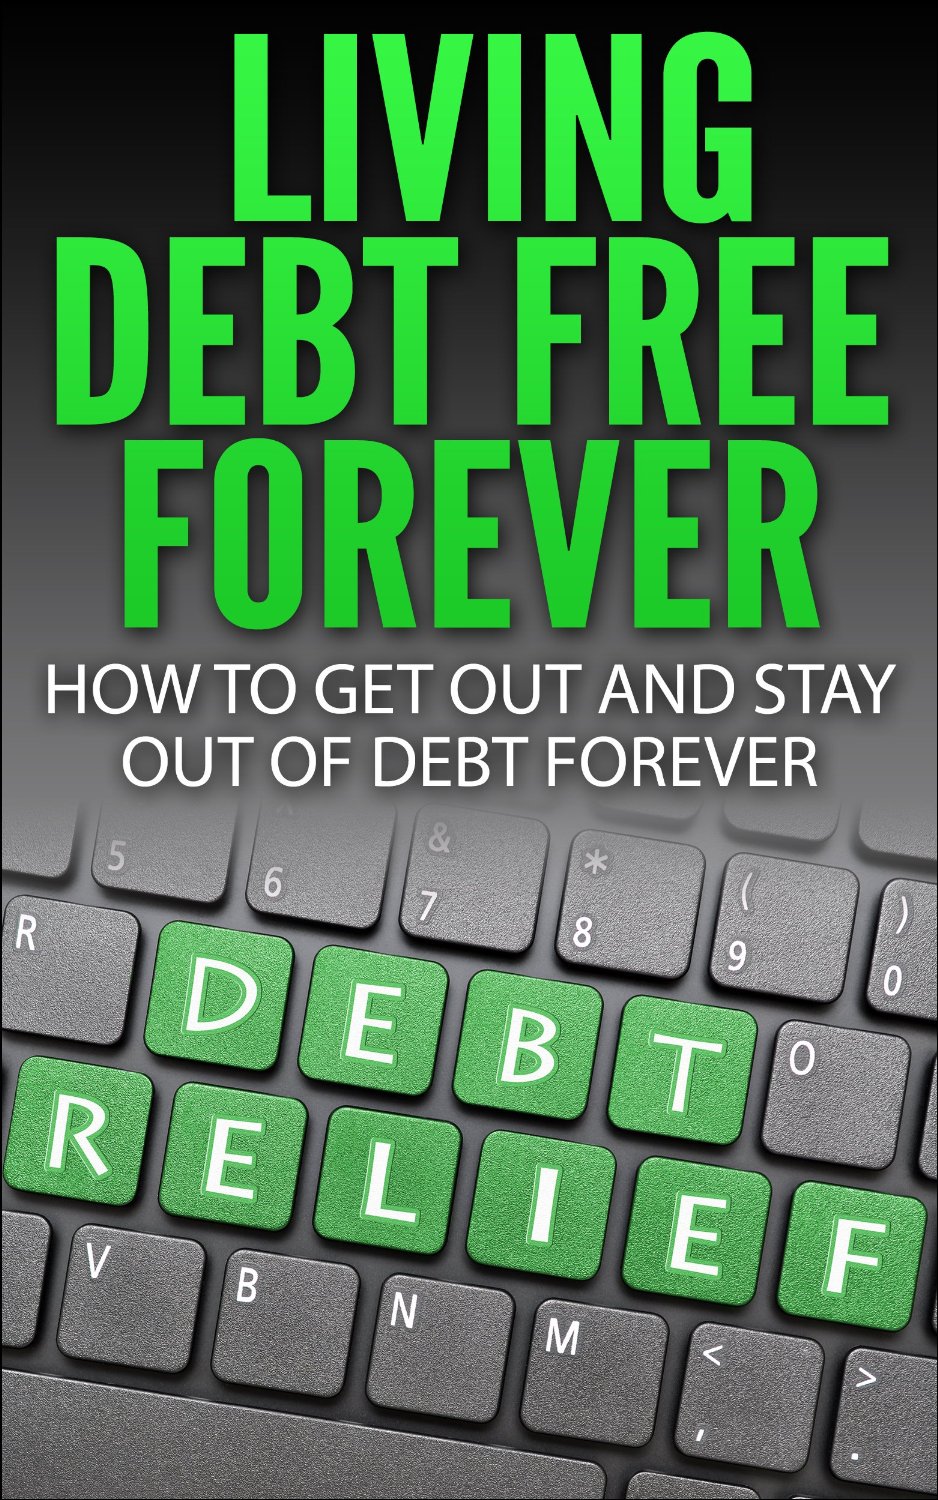 Living Debt Free Forever: How To Get Out And Stay Out Of Debt Forever by David Hope